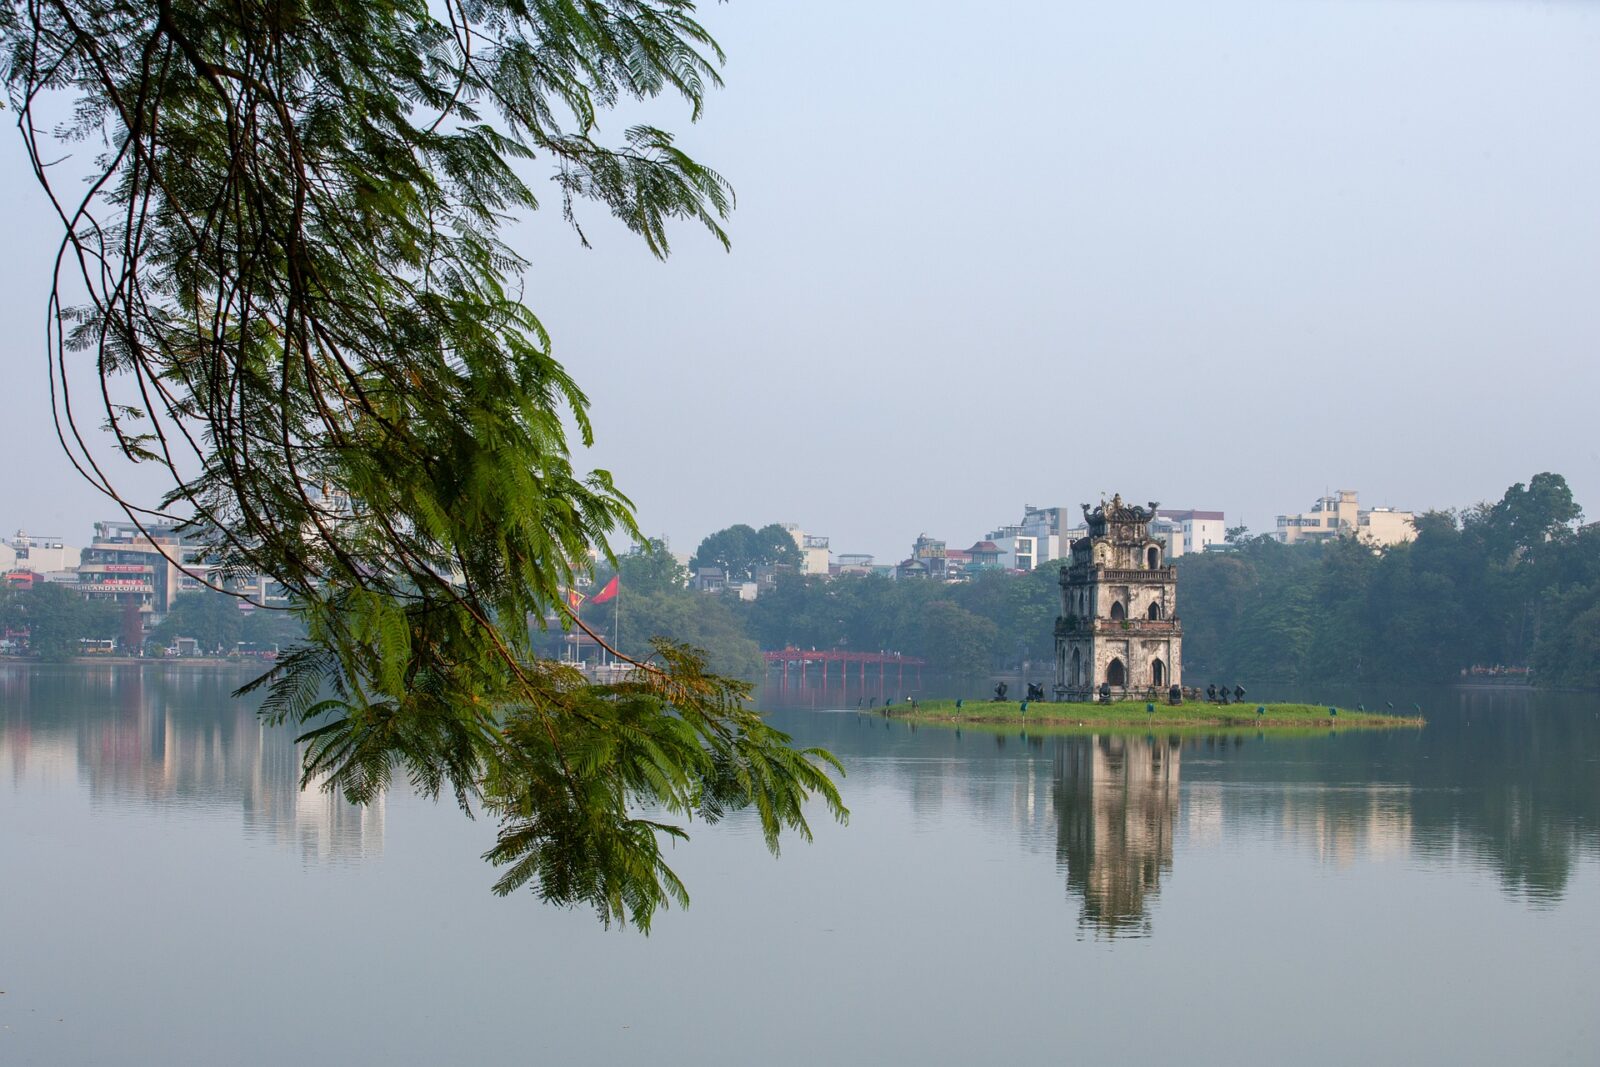 turtle tower in vietnam from afar across the lake with cityscape in background